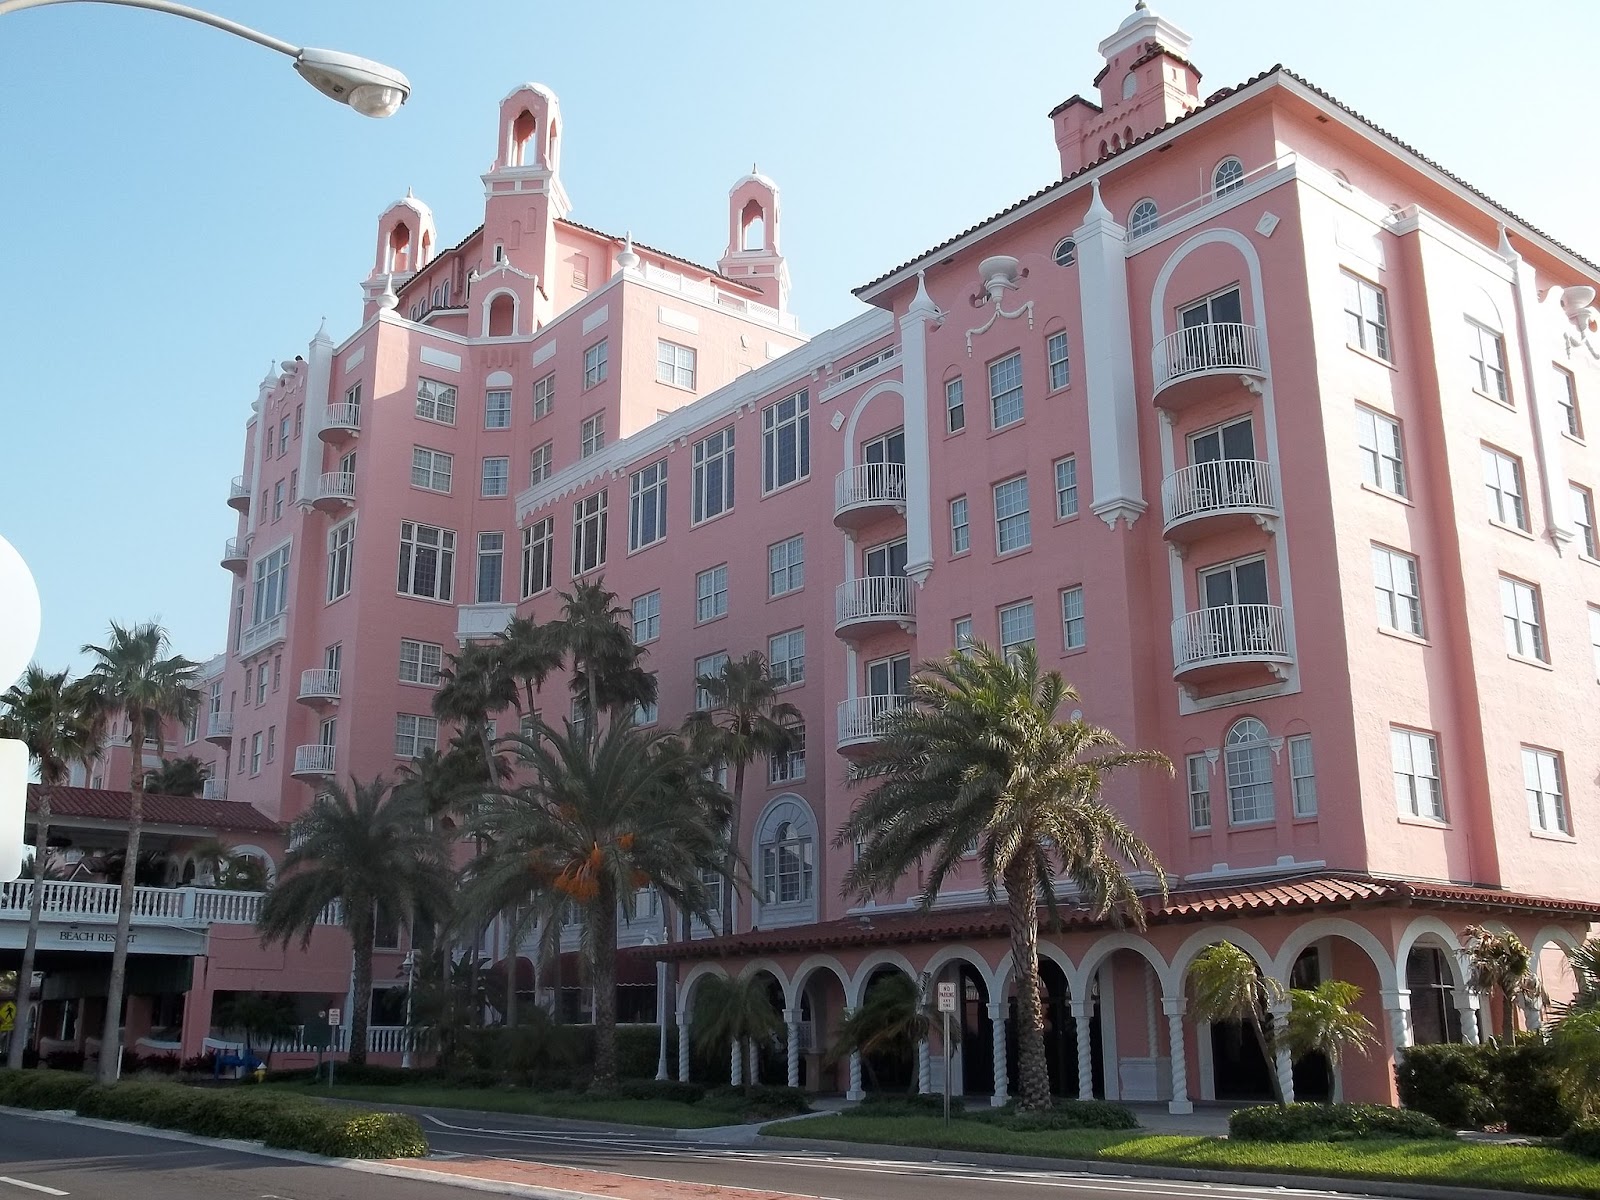 Large pink and white building lined with palm trees on St. Pete beach 